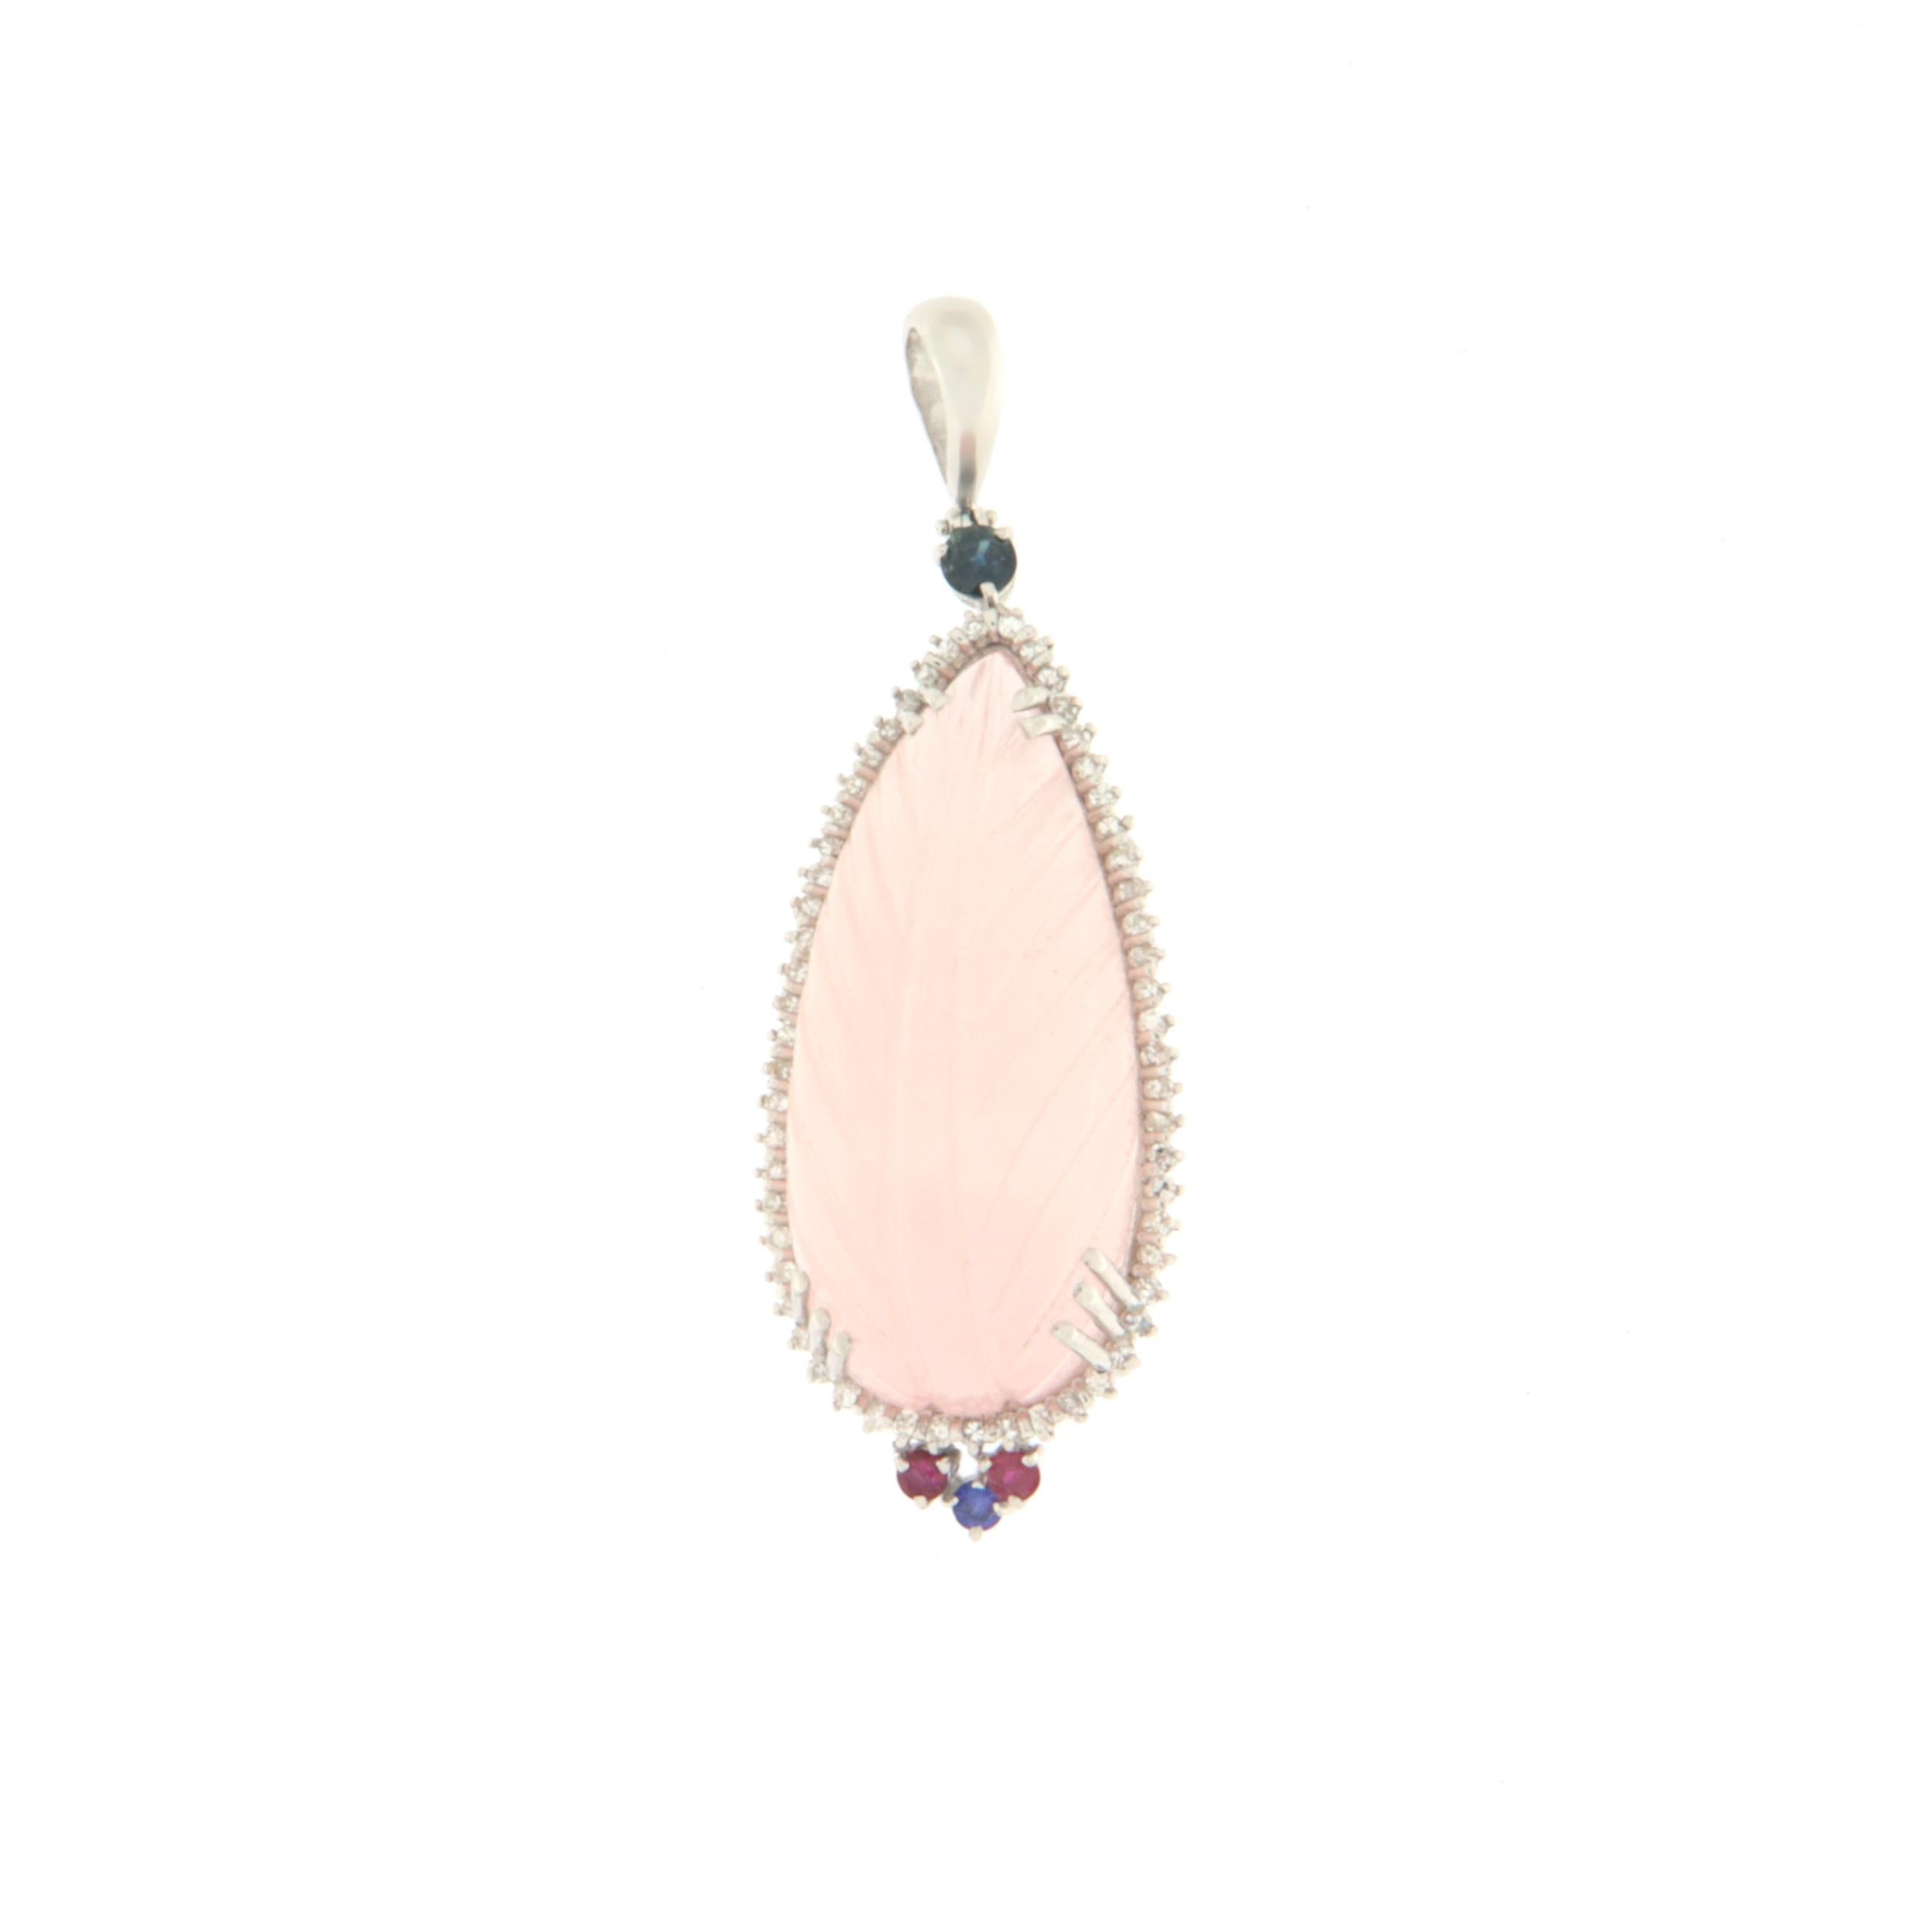 Pendant in 18kt white gold made entirely by hand by our craftsmen.
The chainless pendant in the picture is composed of a leaf-shaped quartz, sapphires, rubies and natural diamonds.

Pendant total weight 13.90 grams
Diamonds weight 1 karat
Rubies and